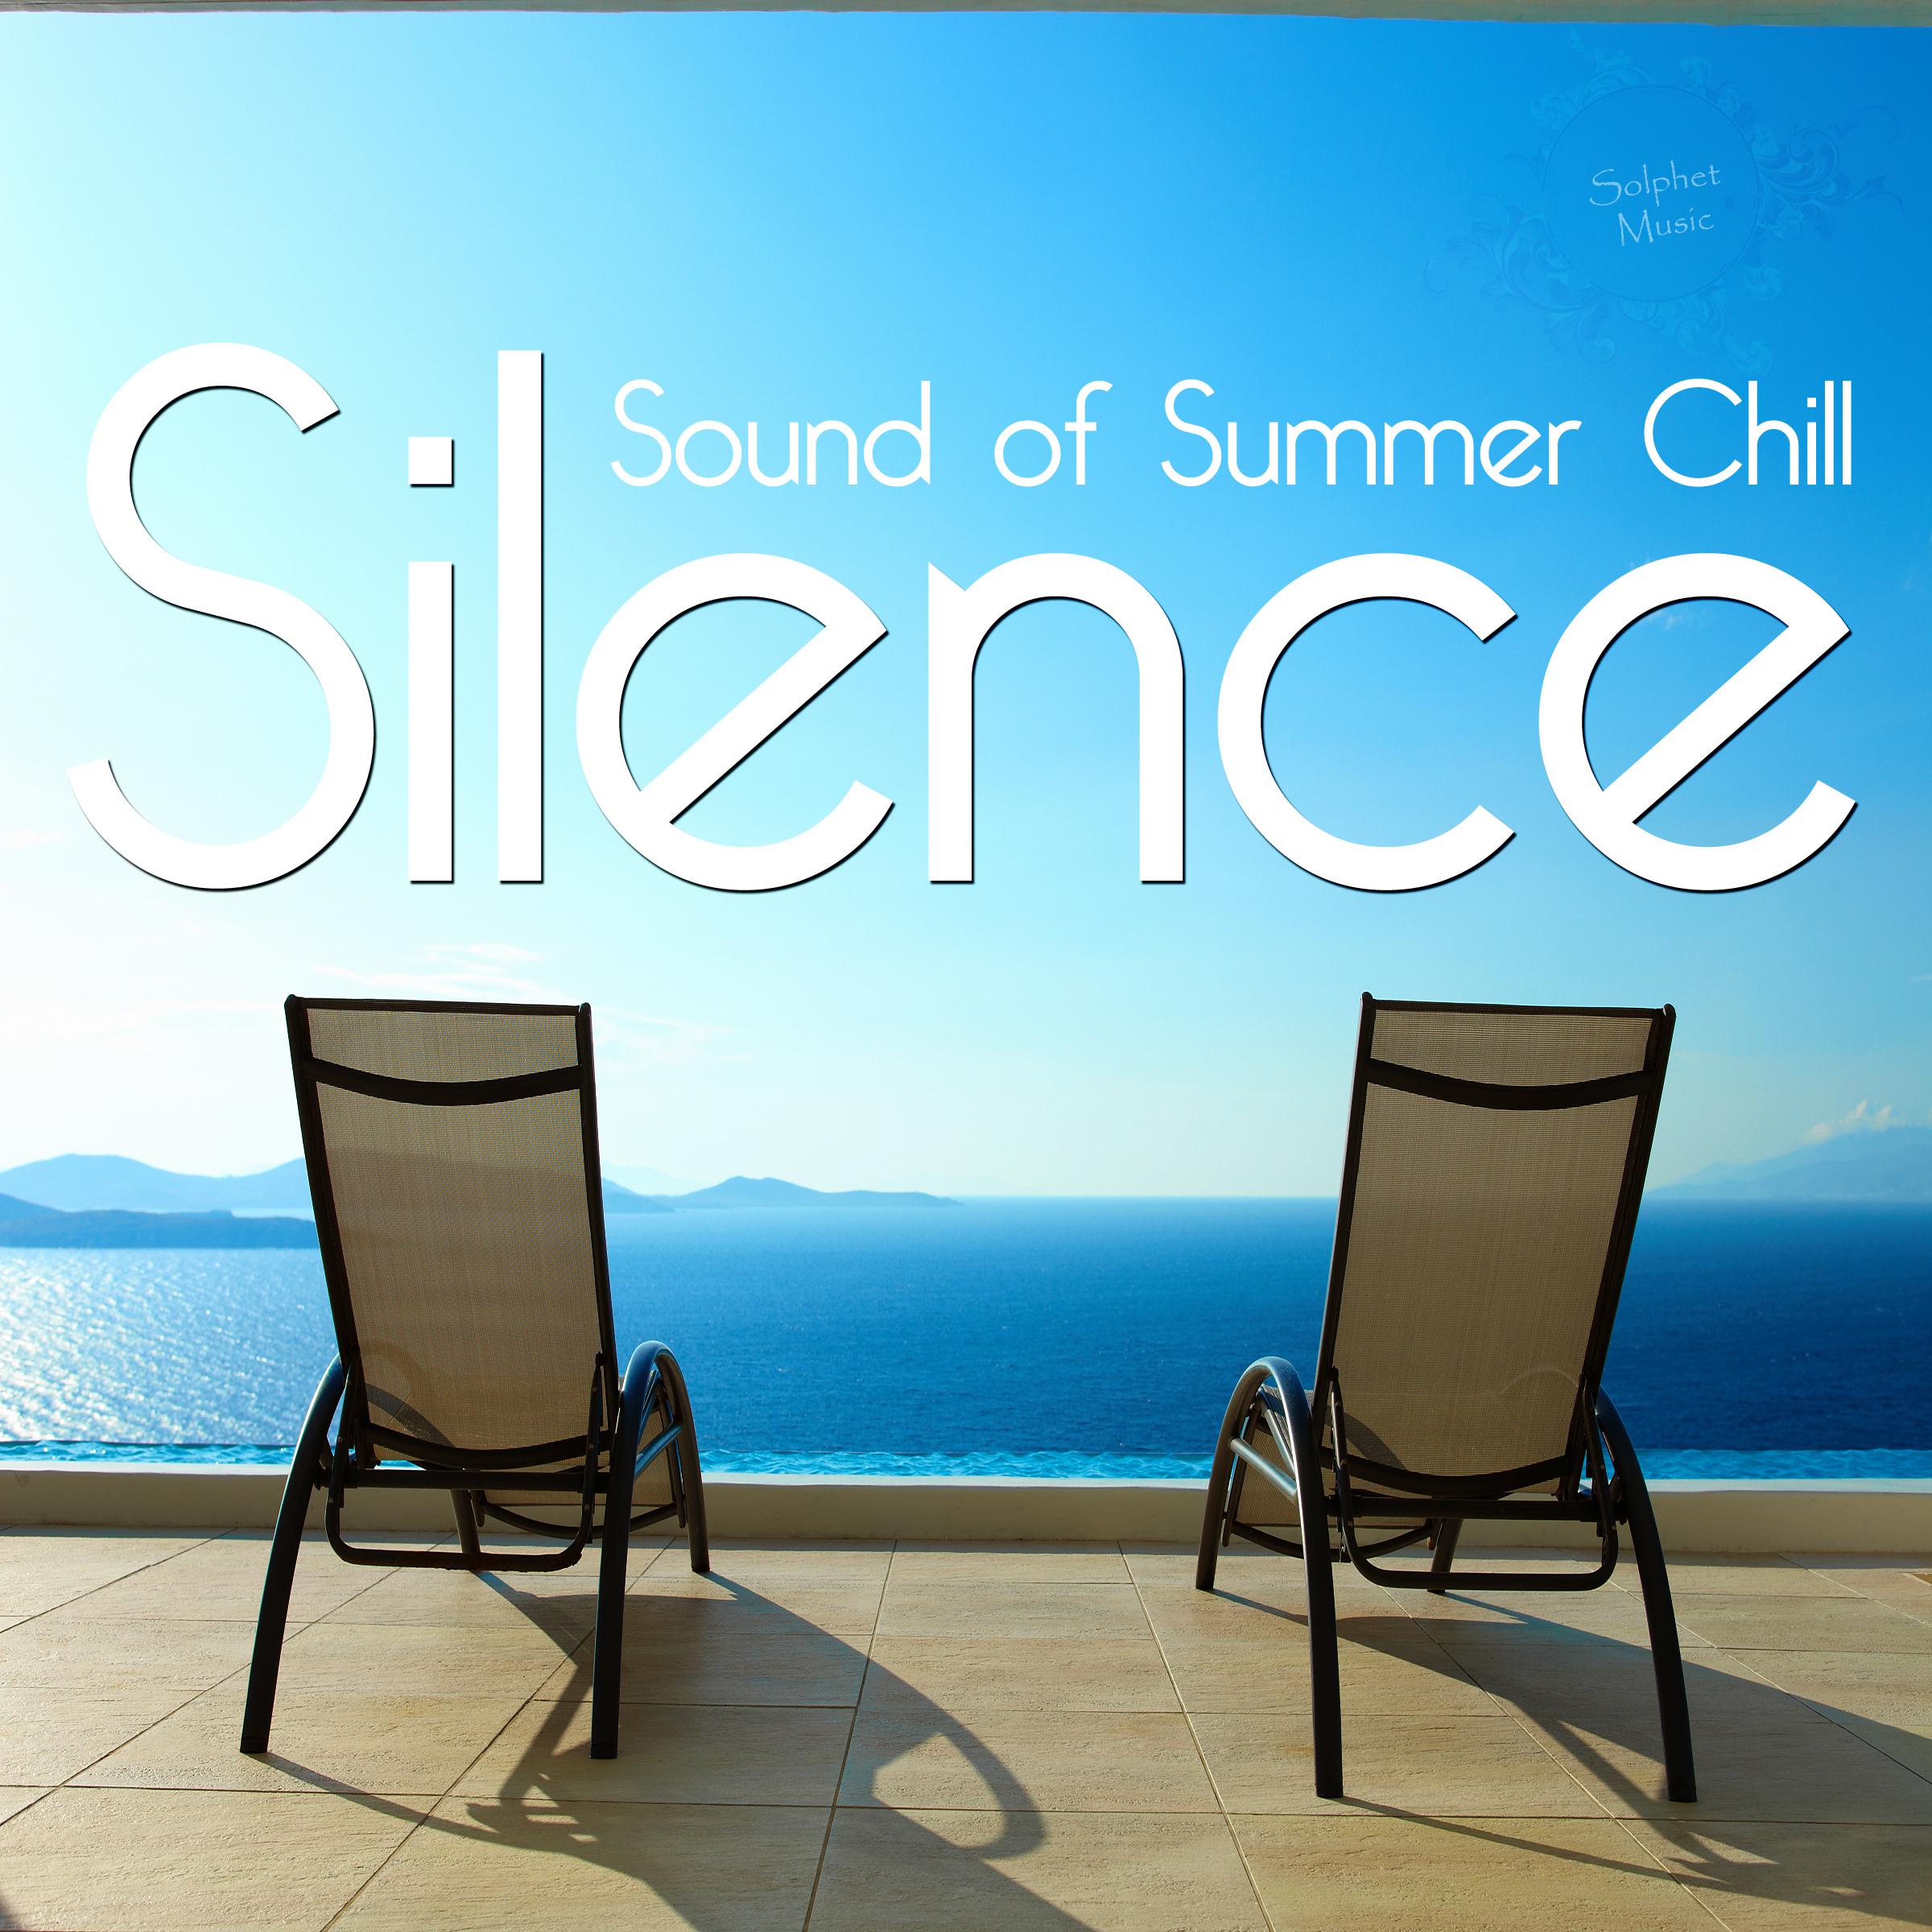 Silence - Sound of the Summer Chill